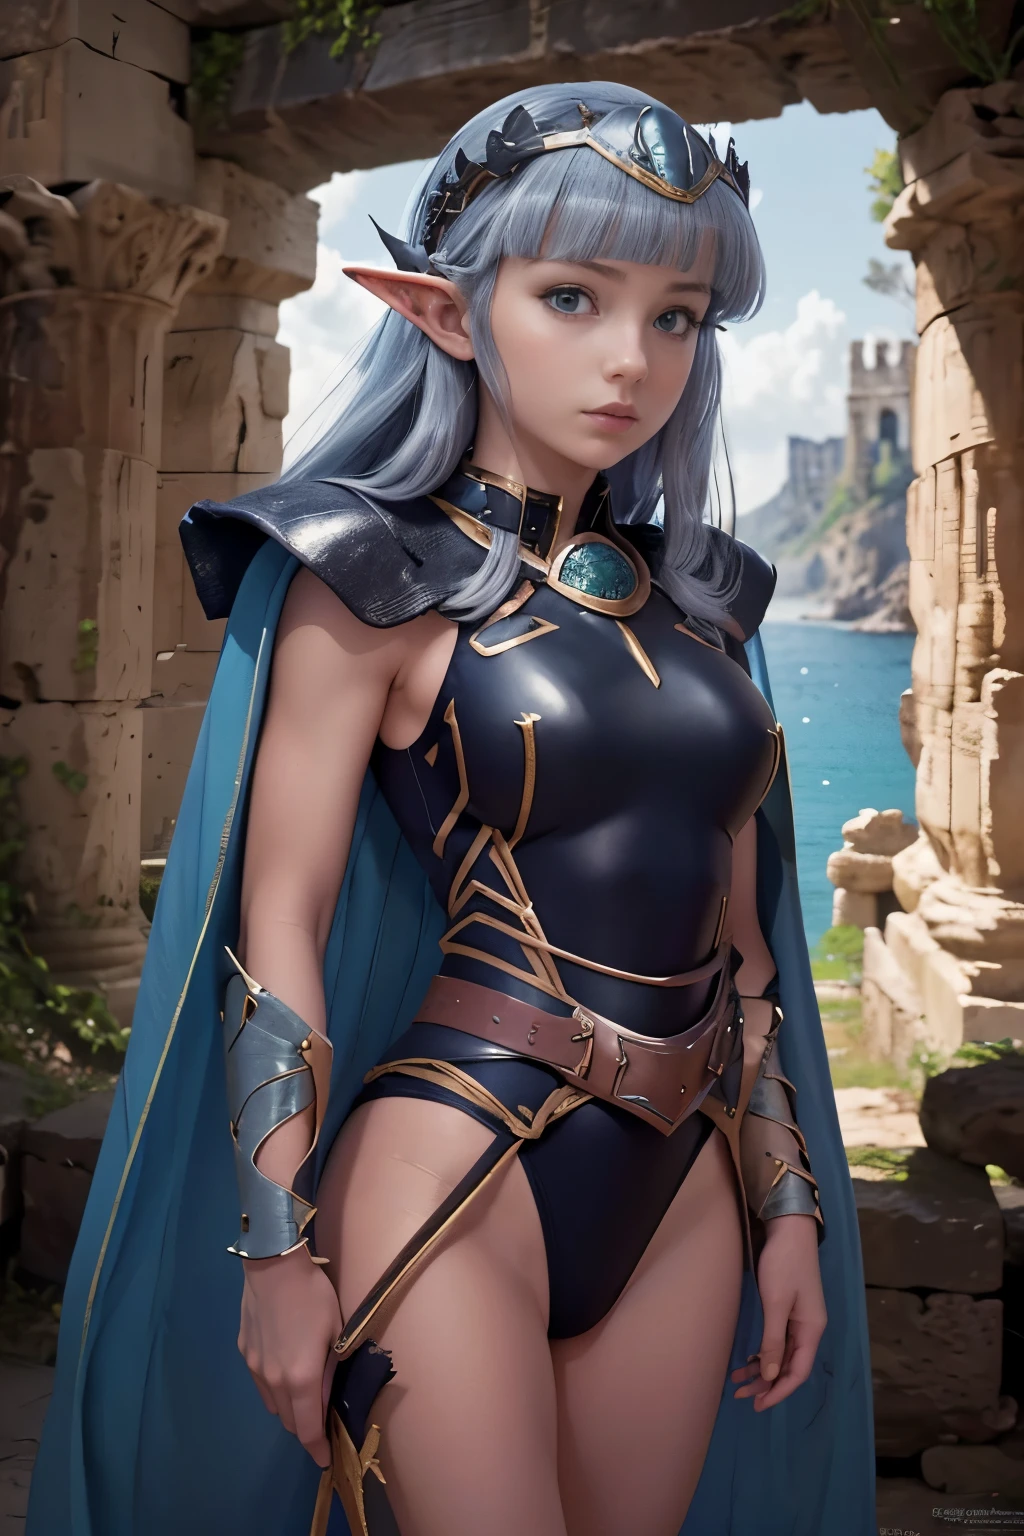 (High resolution) 1 girl, alone, Goblins girl in armor, Elf Girl, Goblins, armor, Wearing a black high-cut swimsuit、Cave Crown, Cape, Ruins of ancient Greece,
